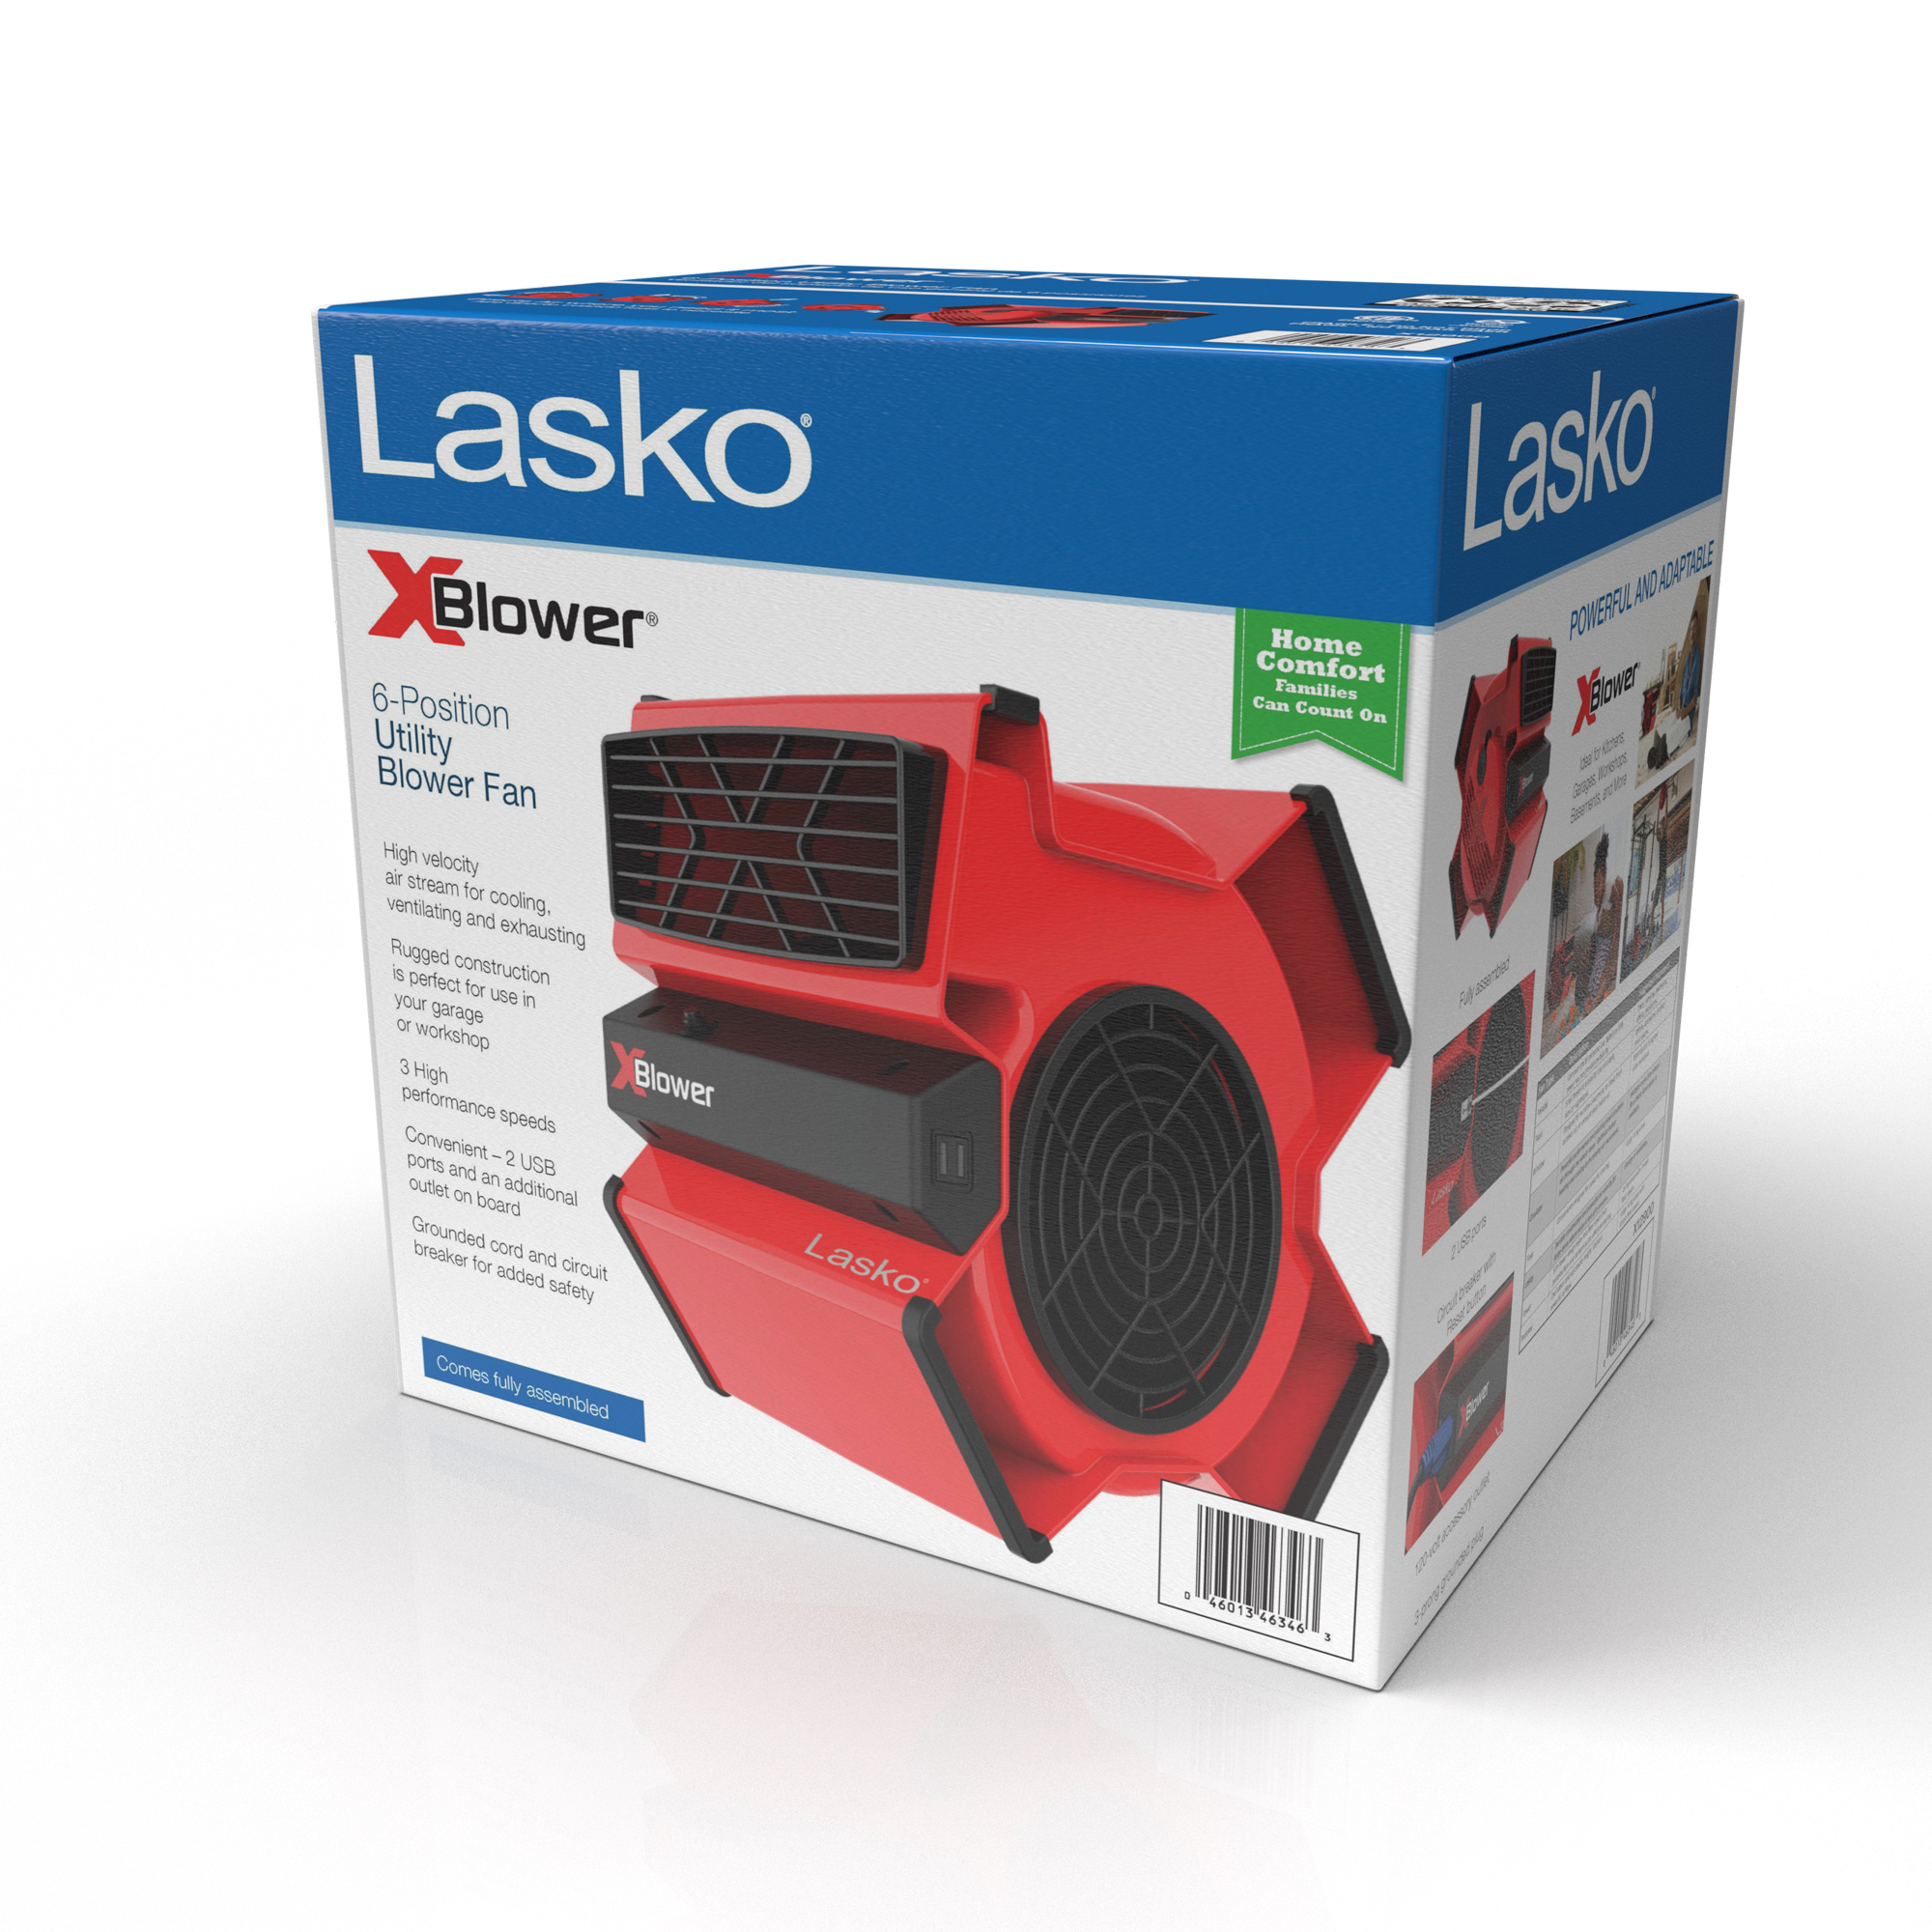 Lasko 11" X-Blower Multi-Position Utility Blower Fan with USB Port, Red, X12900, New - image 2 of 5